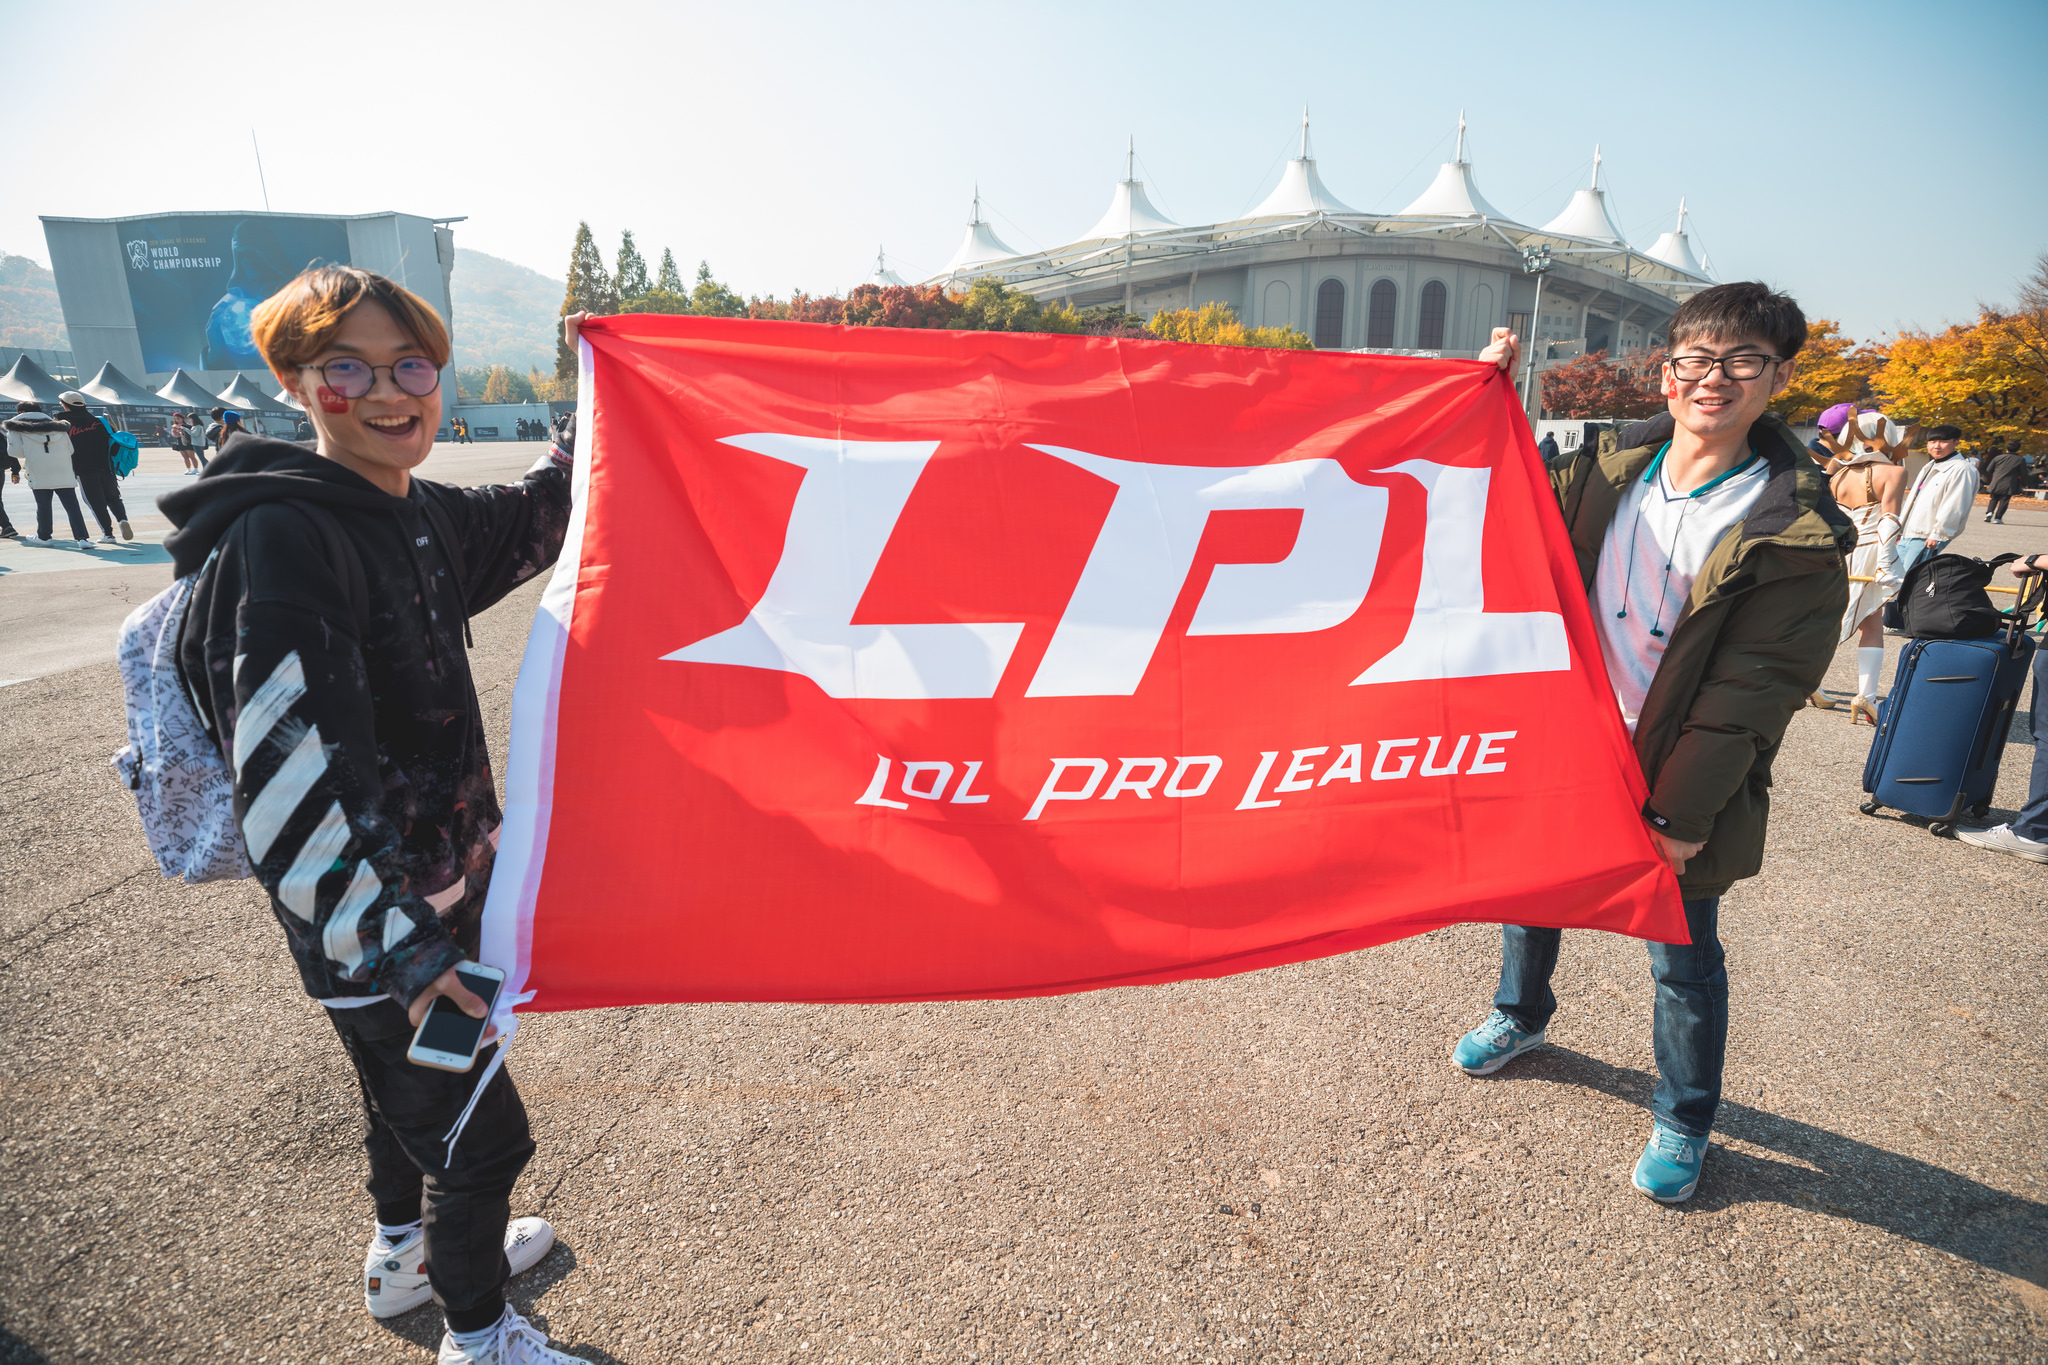 LPL – JD Gaming Extended Jungler Kanavi And ADC LokeN’s Contracts For Upcoming Year In League Of Legends